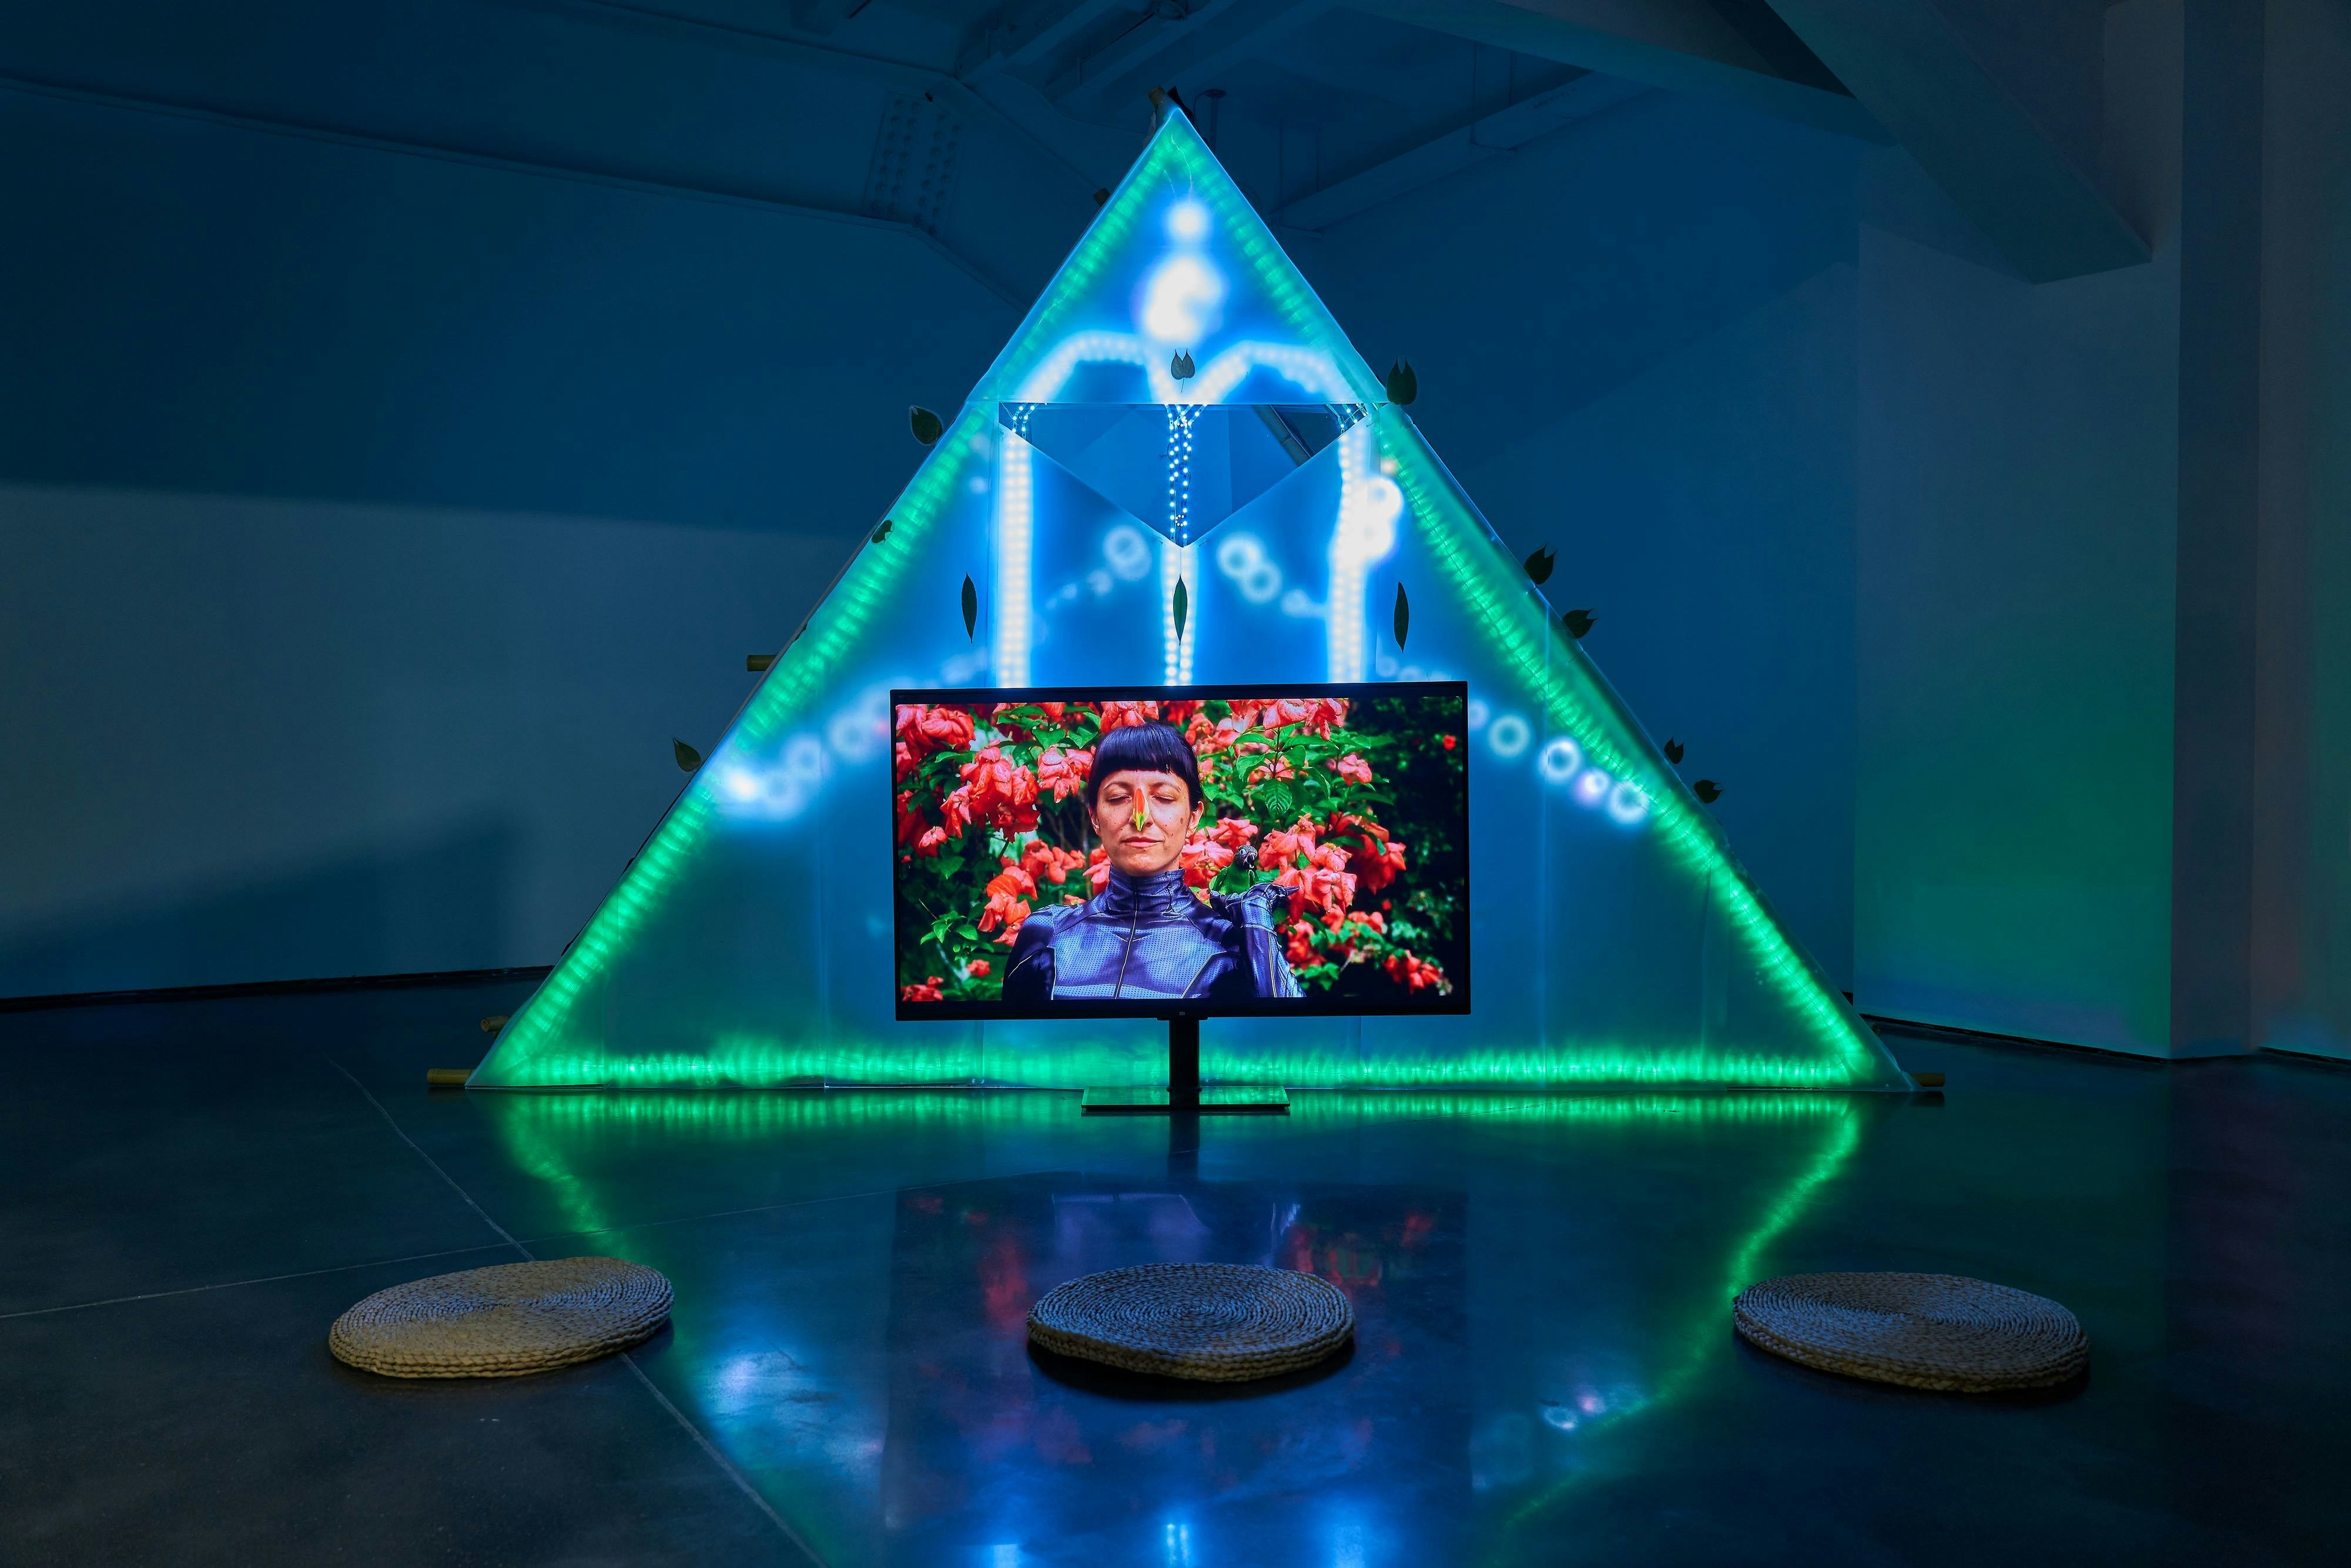 "Matrix Vegetal," 2021/22, Patricia Domínguez. Commissioned by Screen City Biennial and Cecilia Brunson Projects. Installation at Macalline Art Center, Beijing. ©Patricia Domínguez.